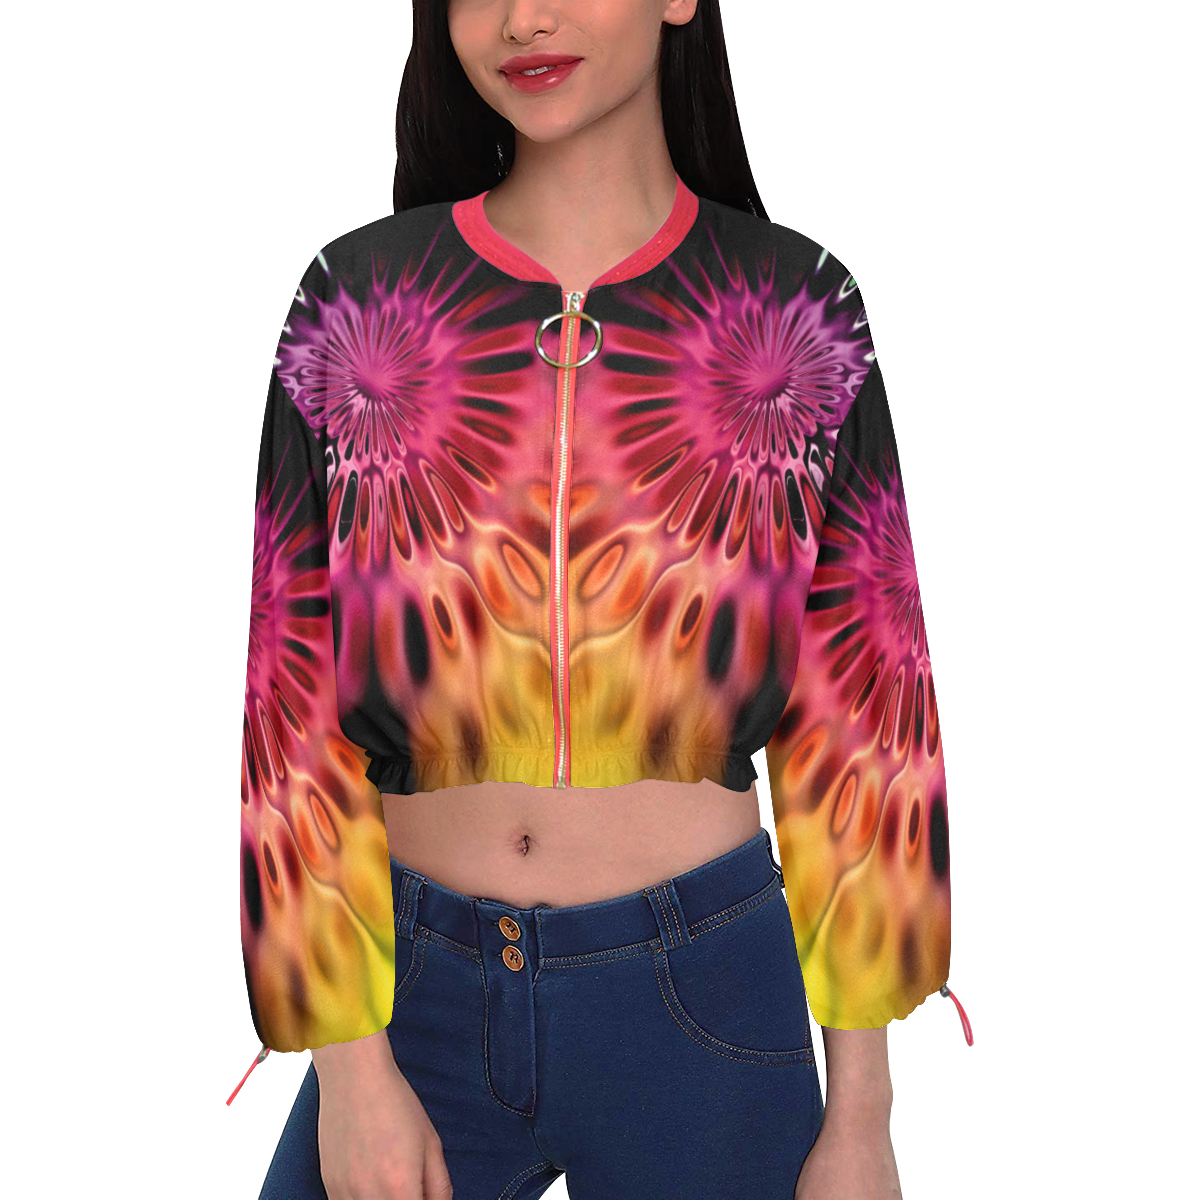 Magic Flower Flames Fractal - Psychedelic Colors Cropped Chiffon Jacket for Women (Model H30)